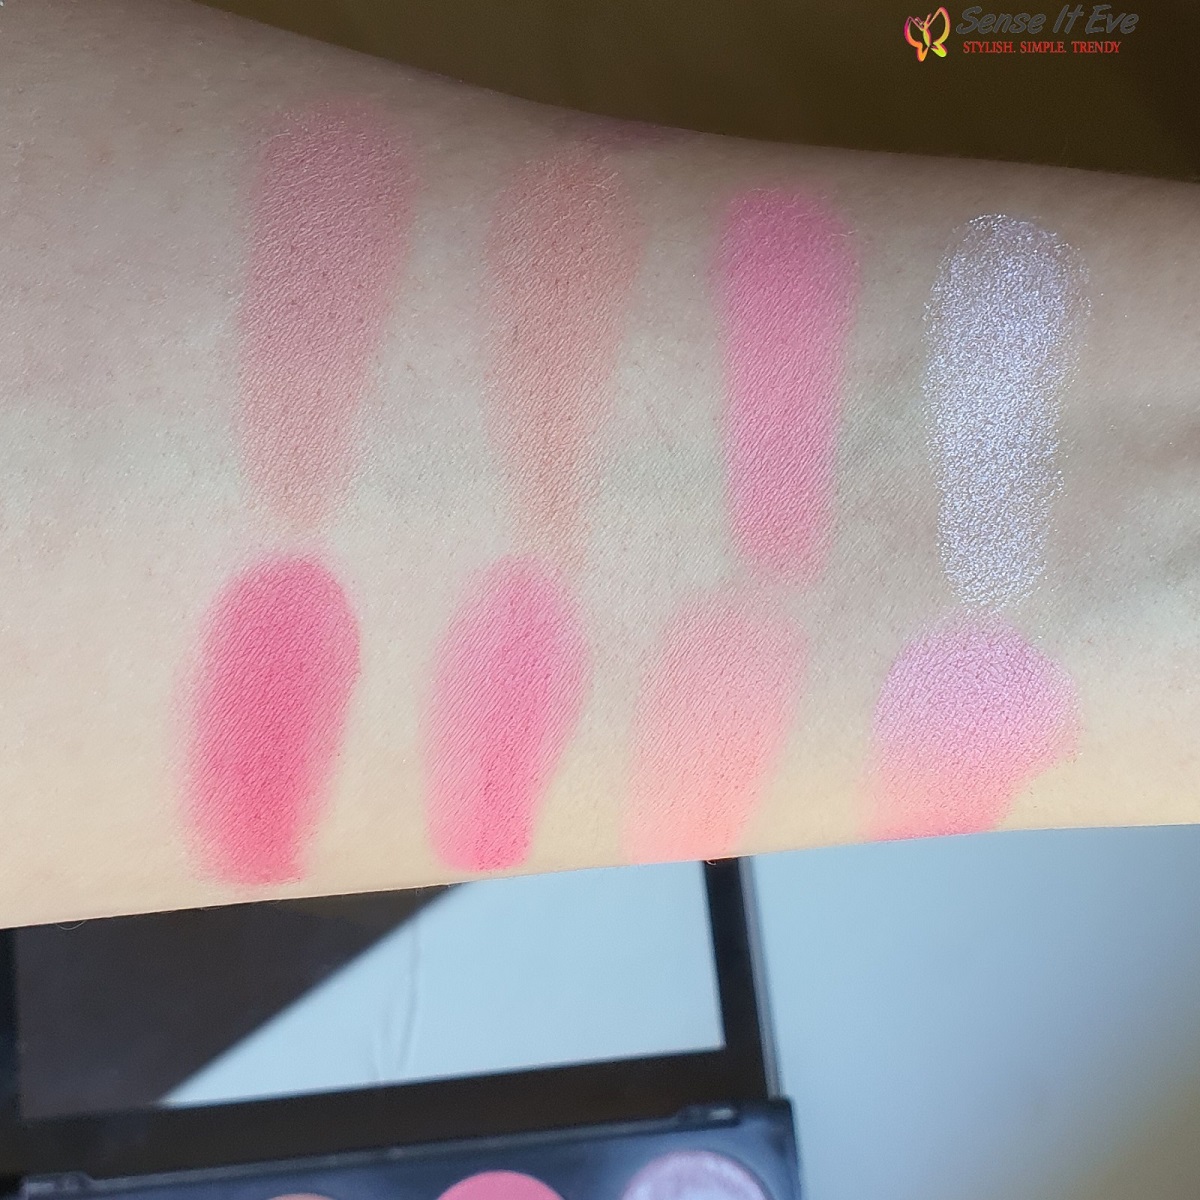 Makeup Revolution Ultra Professional Blush Palette Sugar and Spice Swatches Sense It Eve Revolution Ultra Blush Palette Sugar and Spice : Review & Swatches